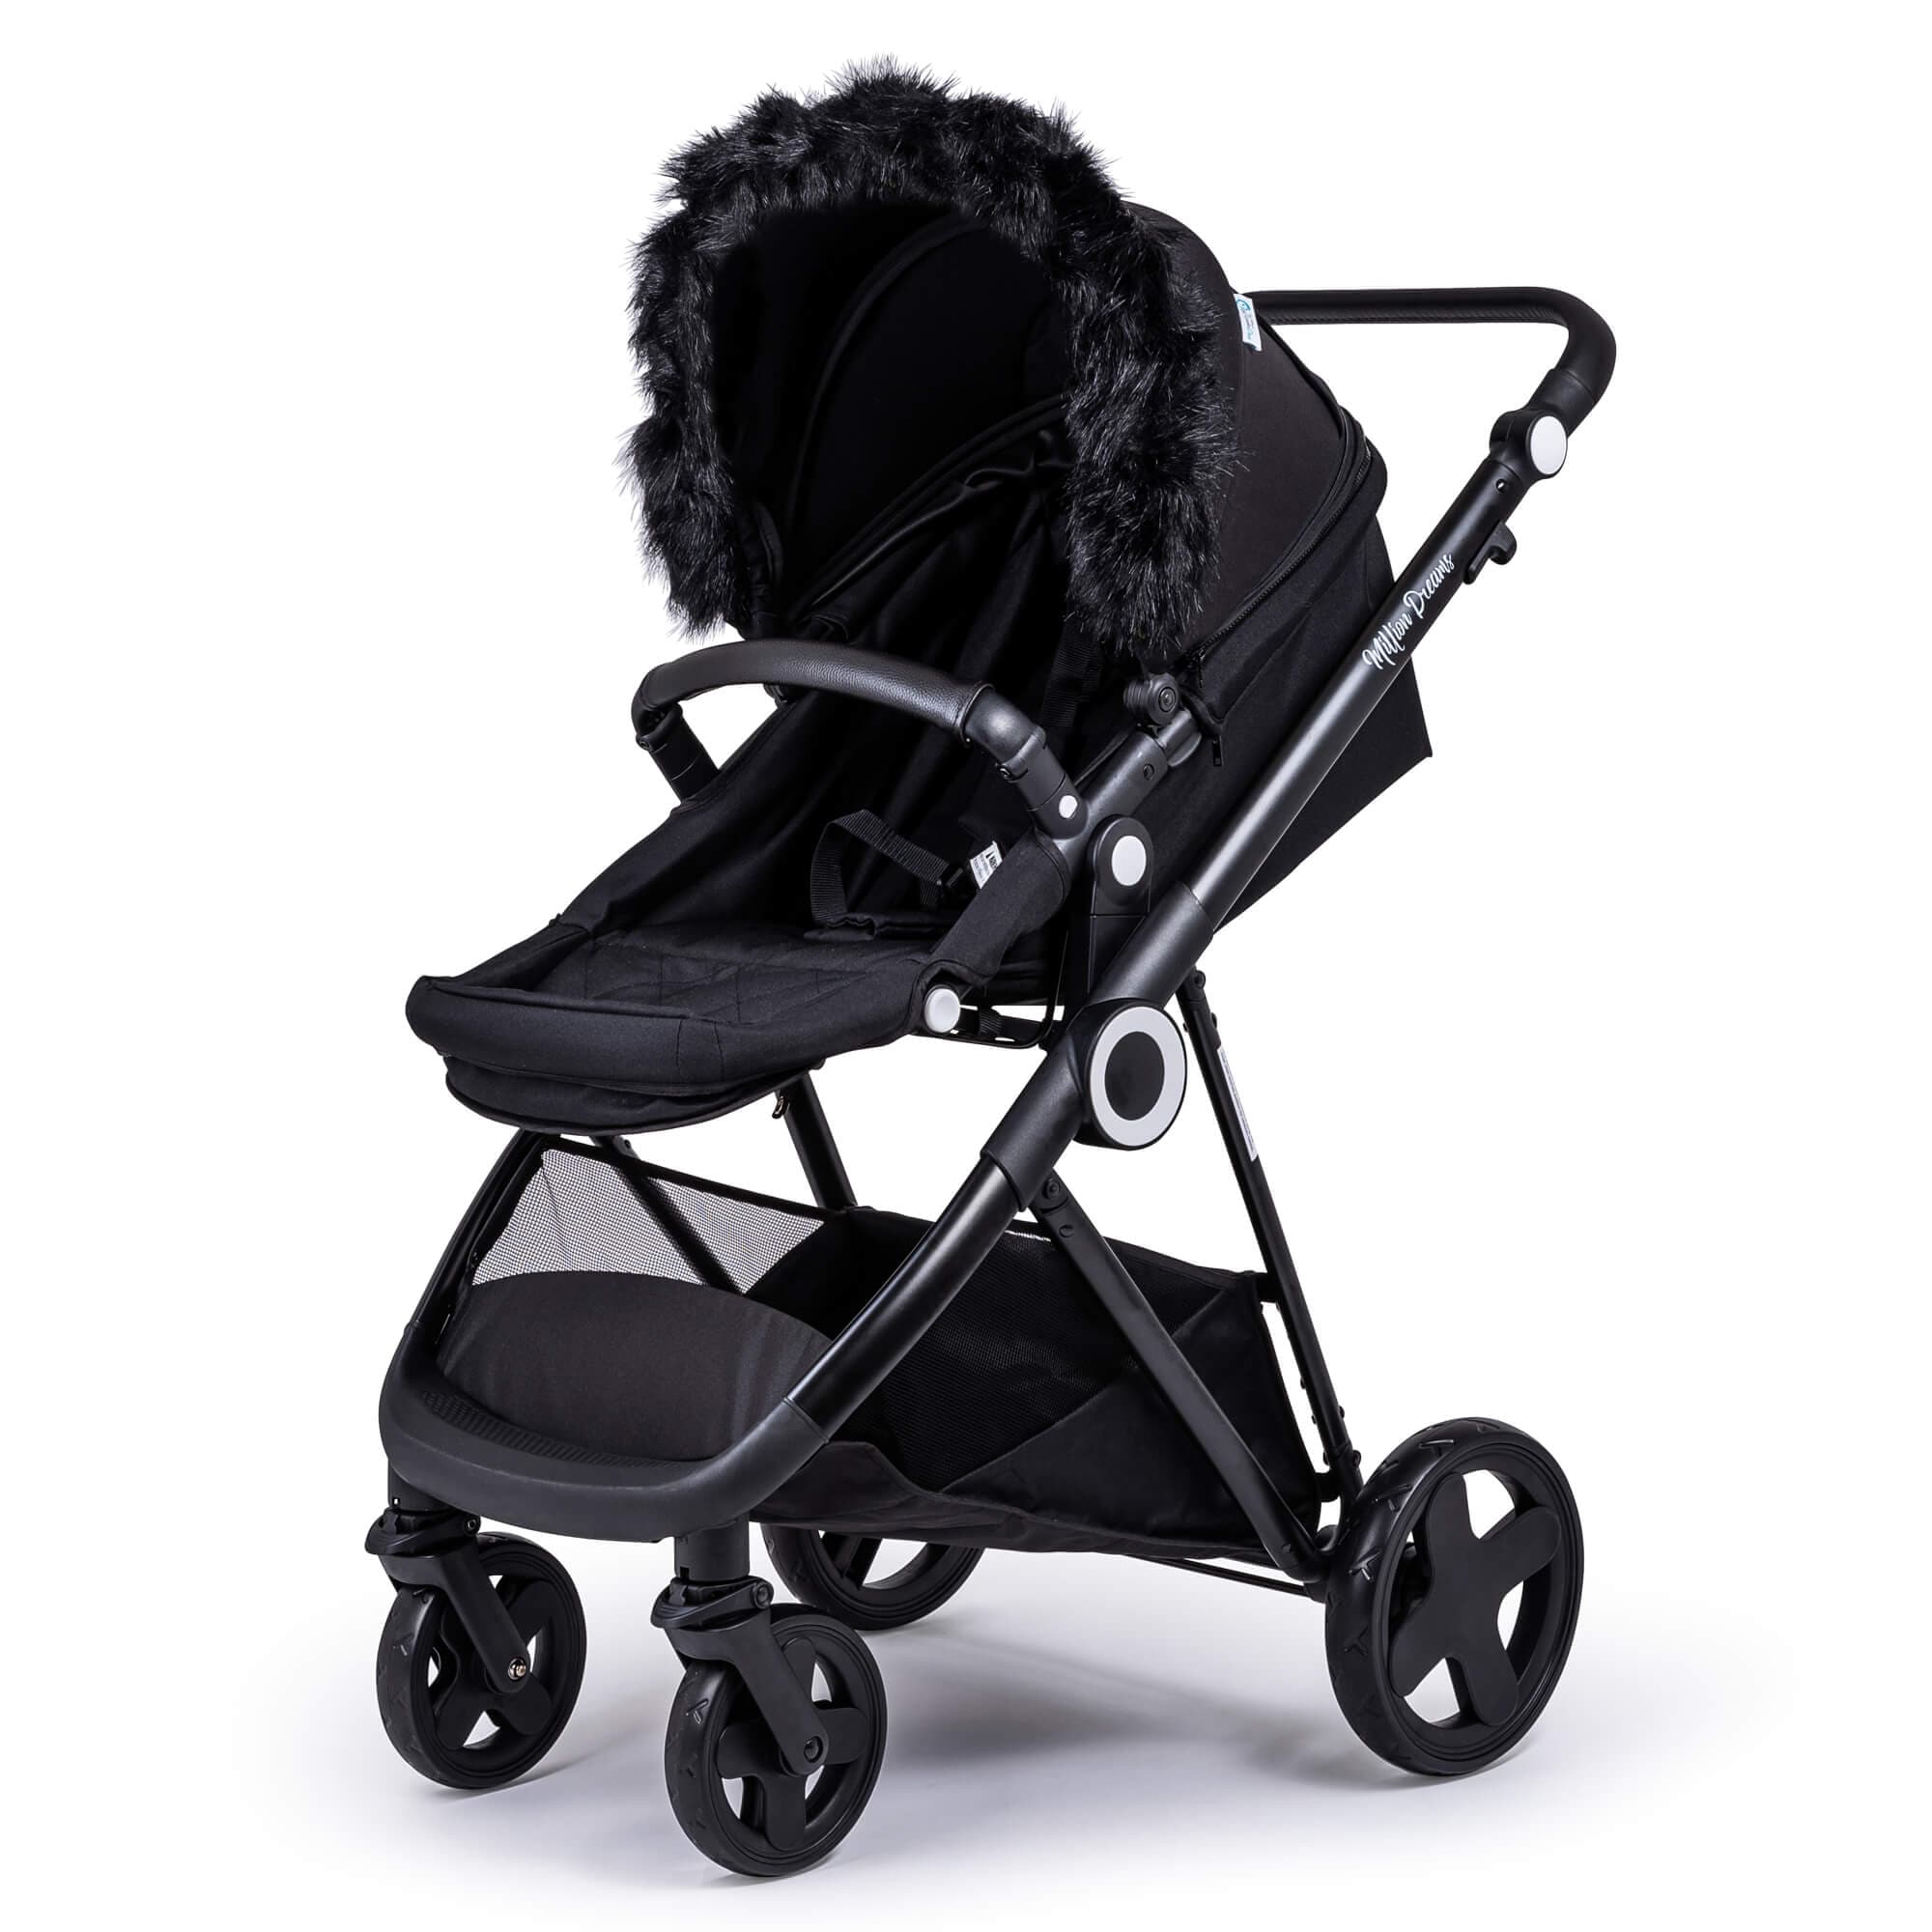 Pram Fur Hood Trim Attachment for Pushchair Compatible with Phil & Teds - For Your Little One